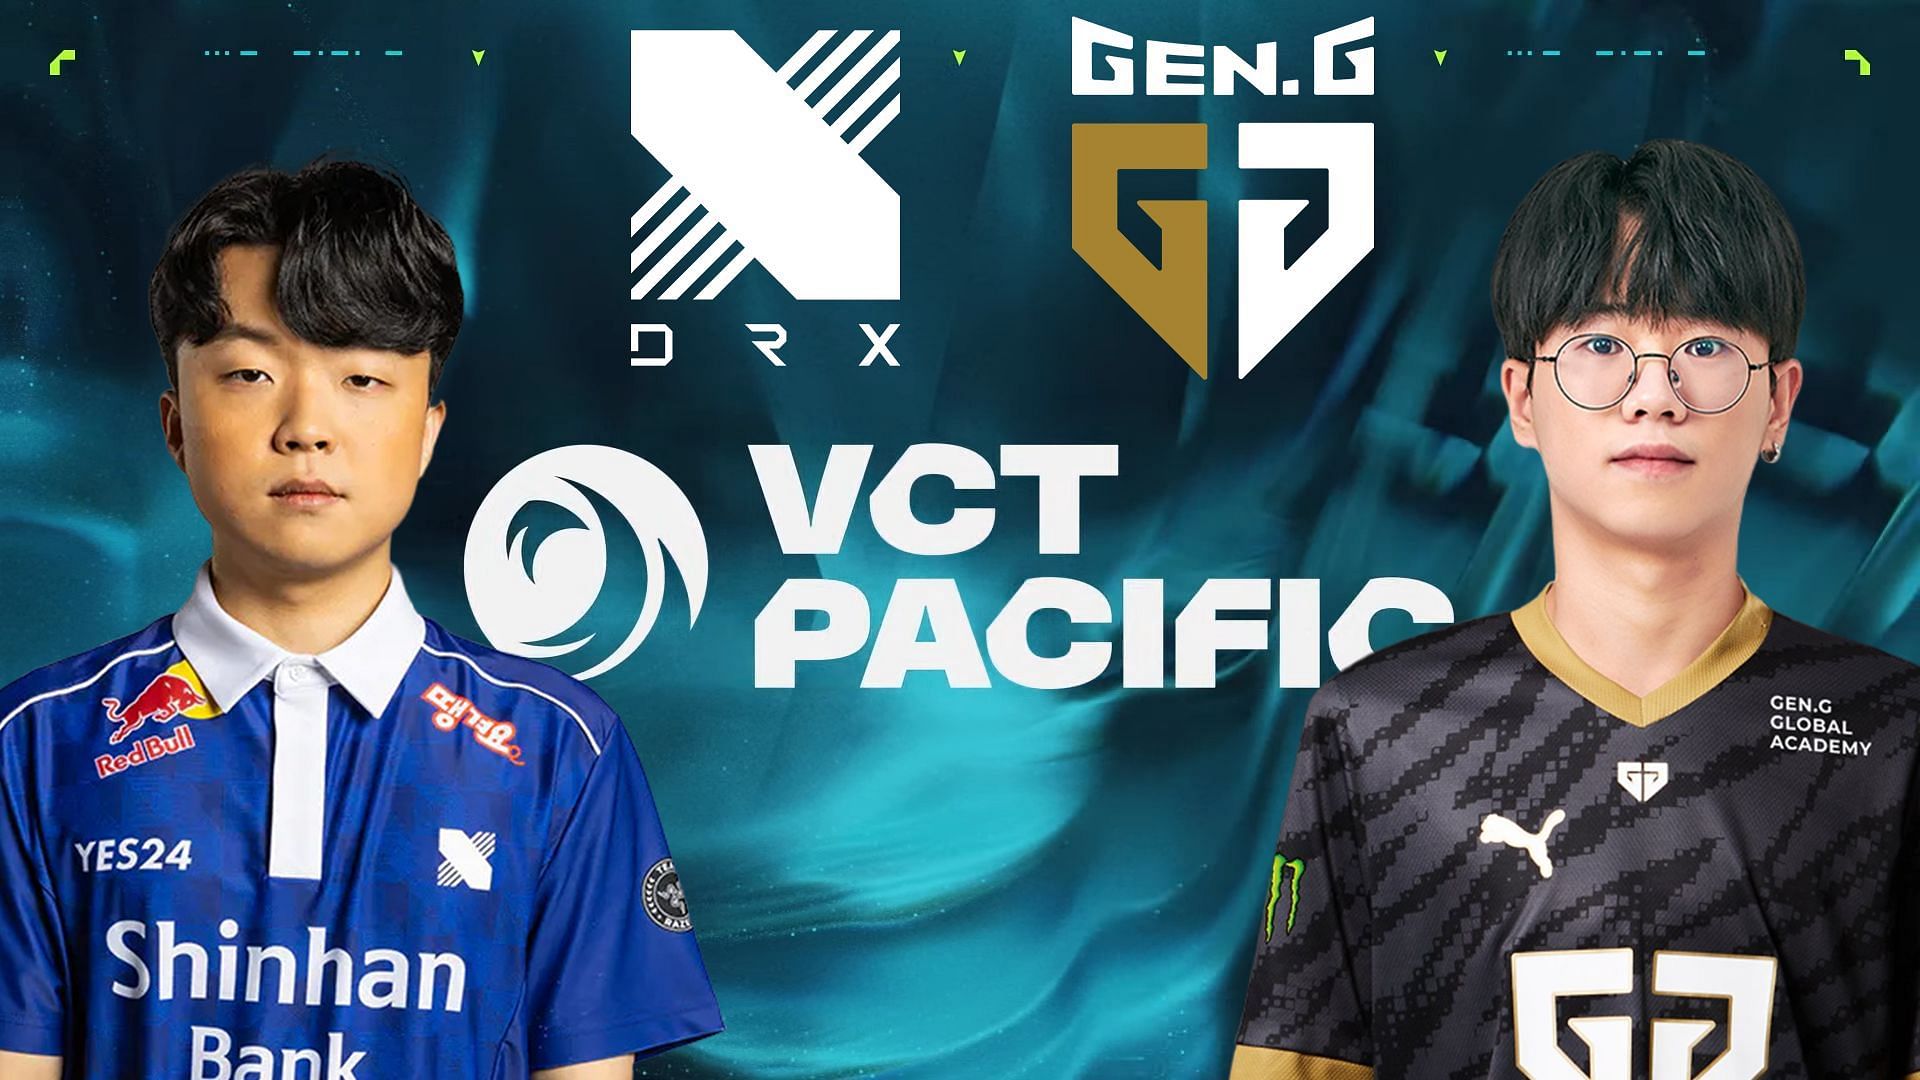 DRX vs Gen.G at VCT Pacific Kickoff (Image via Riot Games, DRX and Gen.G)